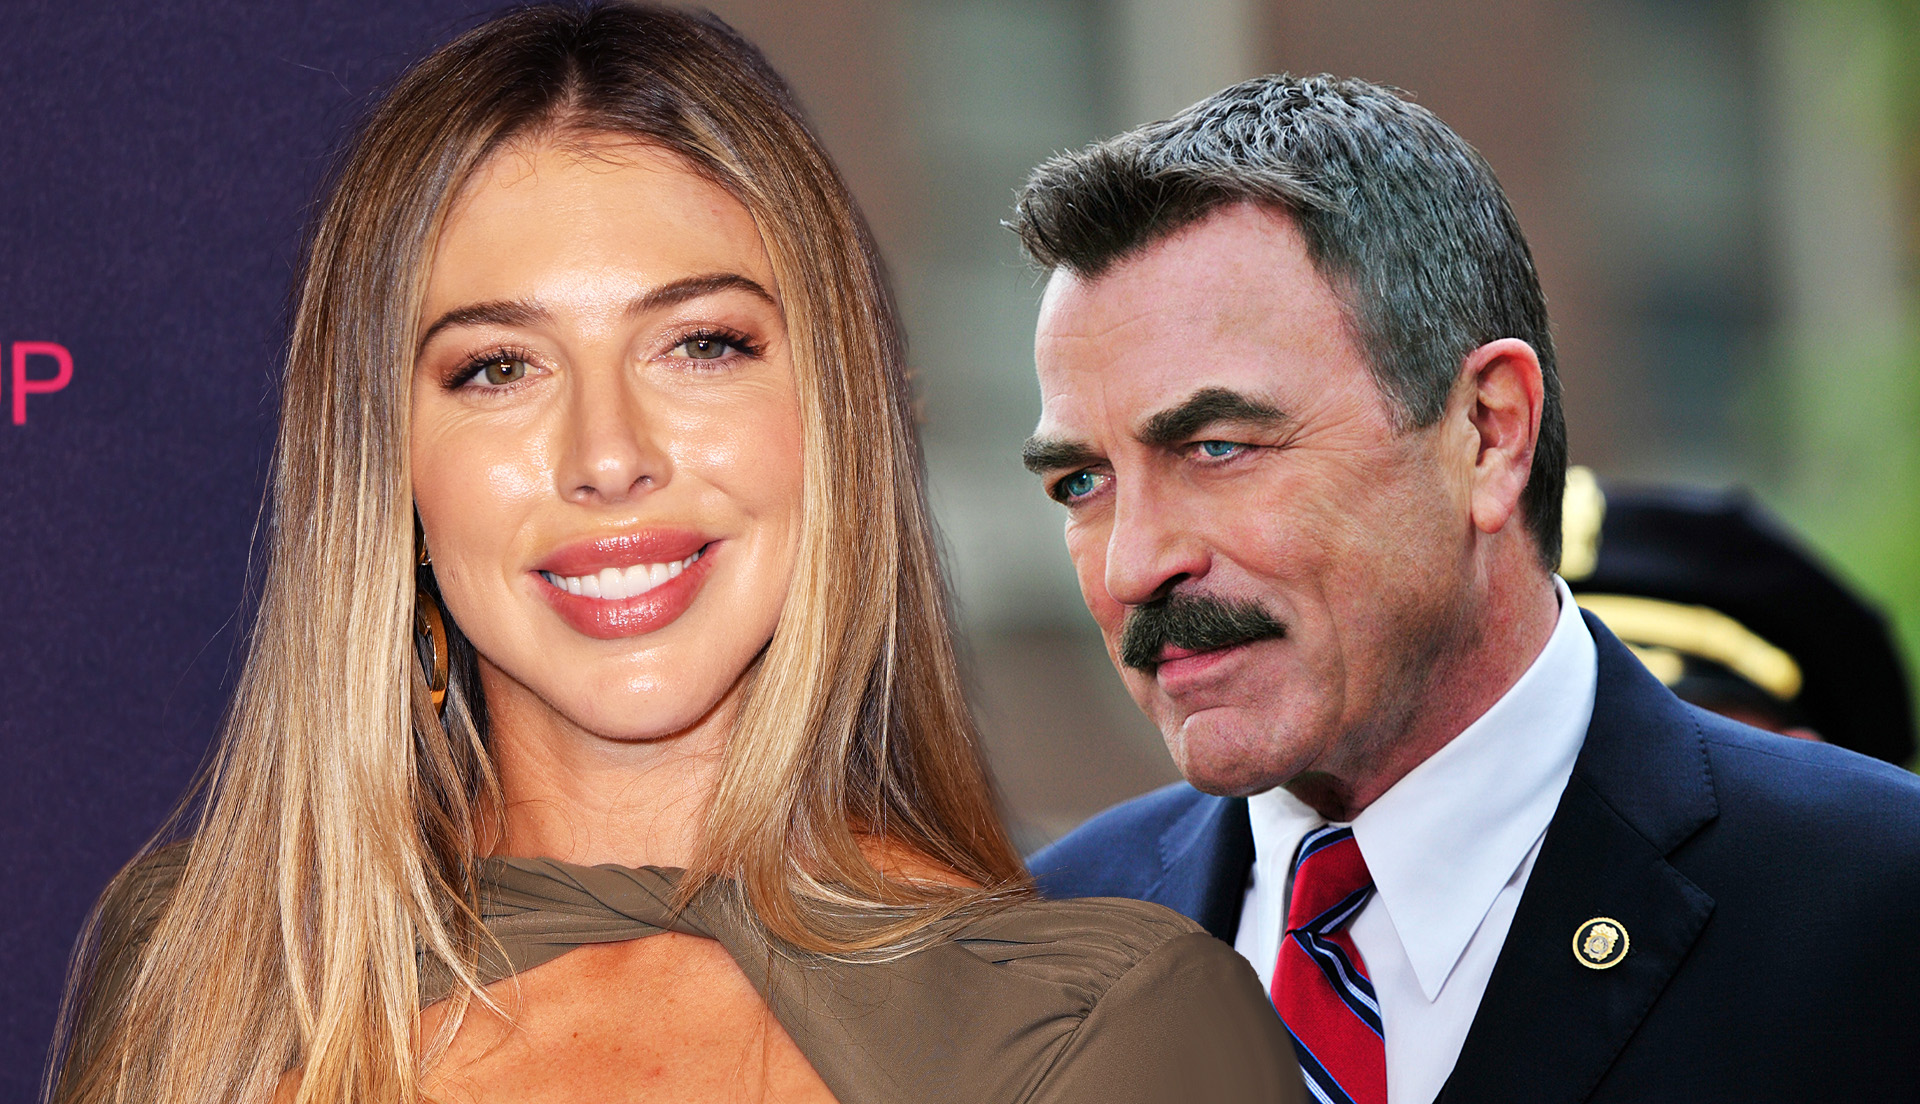 Who Knew Blue Bloods' Tom Selleck's Daughter Was Such a Beauty?